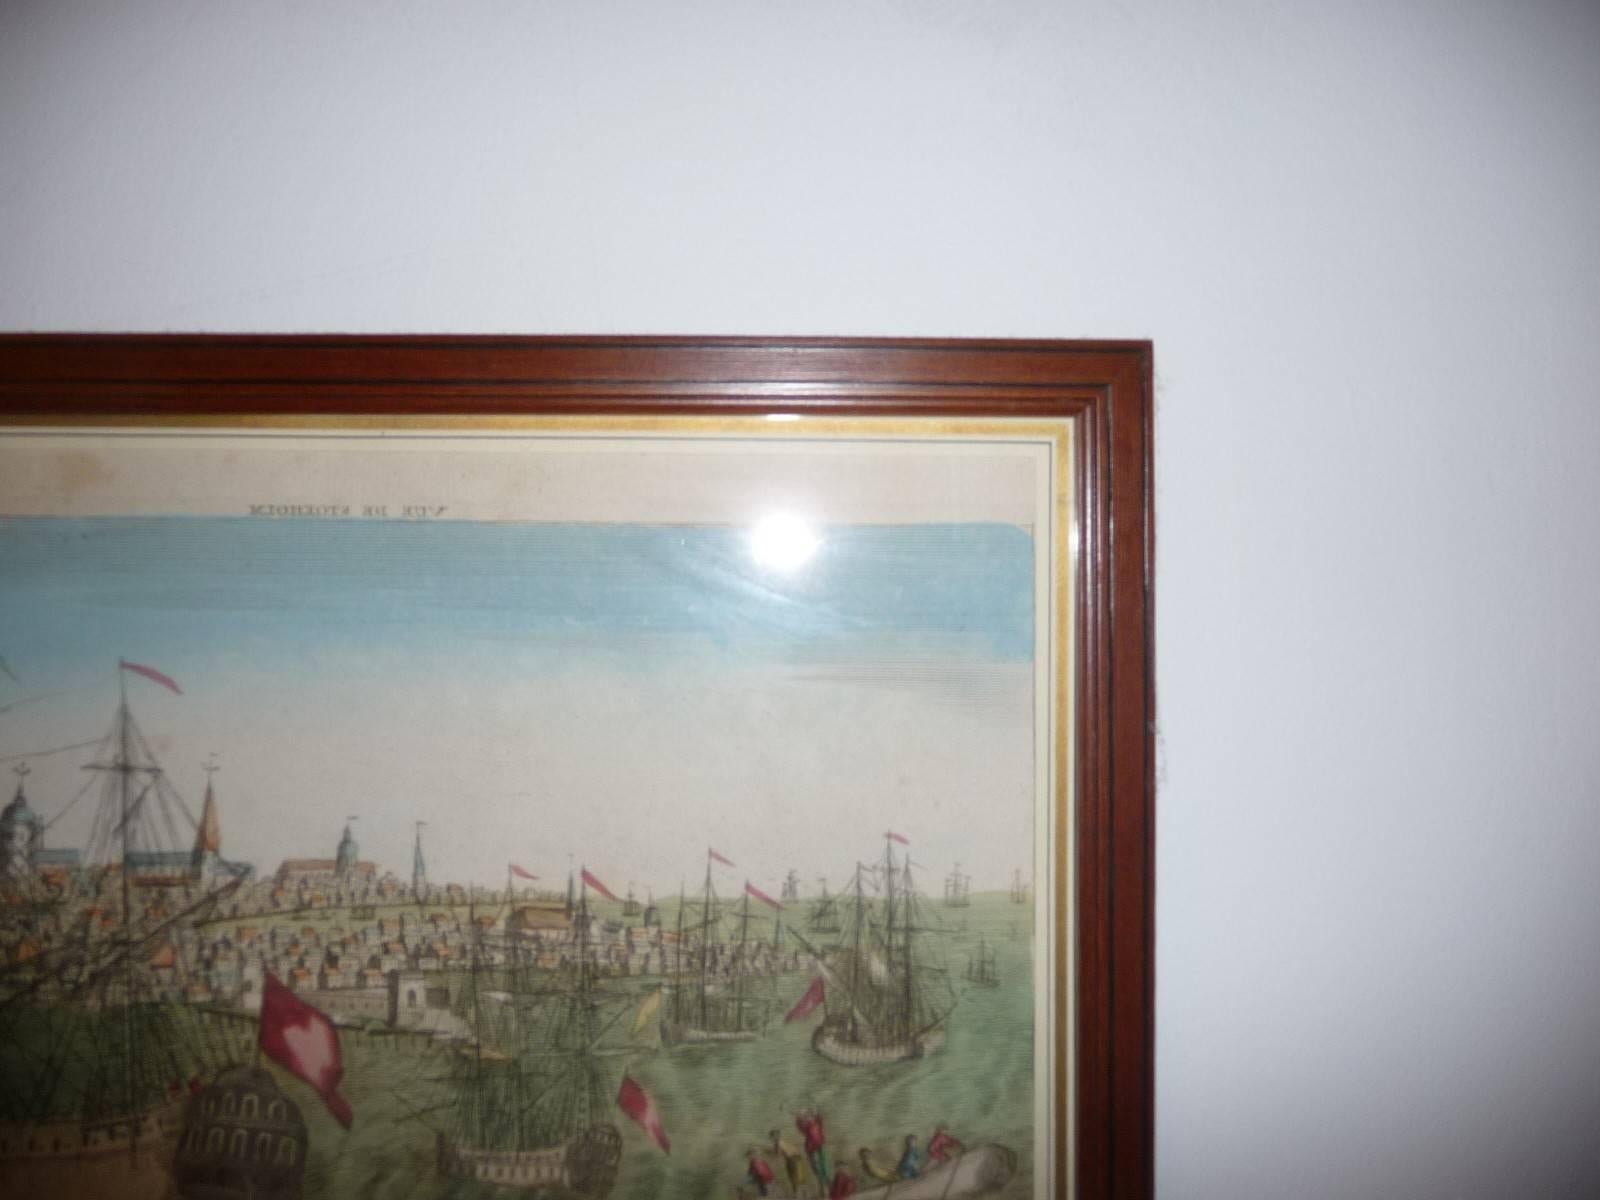 Original hand-colored print - Overview of the City of Stockholm capital of the Kingdom of Sweden.

Mondhare at Paris rue S. Jacques at the Hotel Saumur.

Mondhare engraver, publisher and print-seller and dealer also maps from June 1784, works in